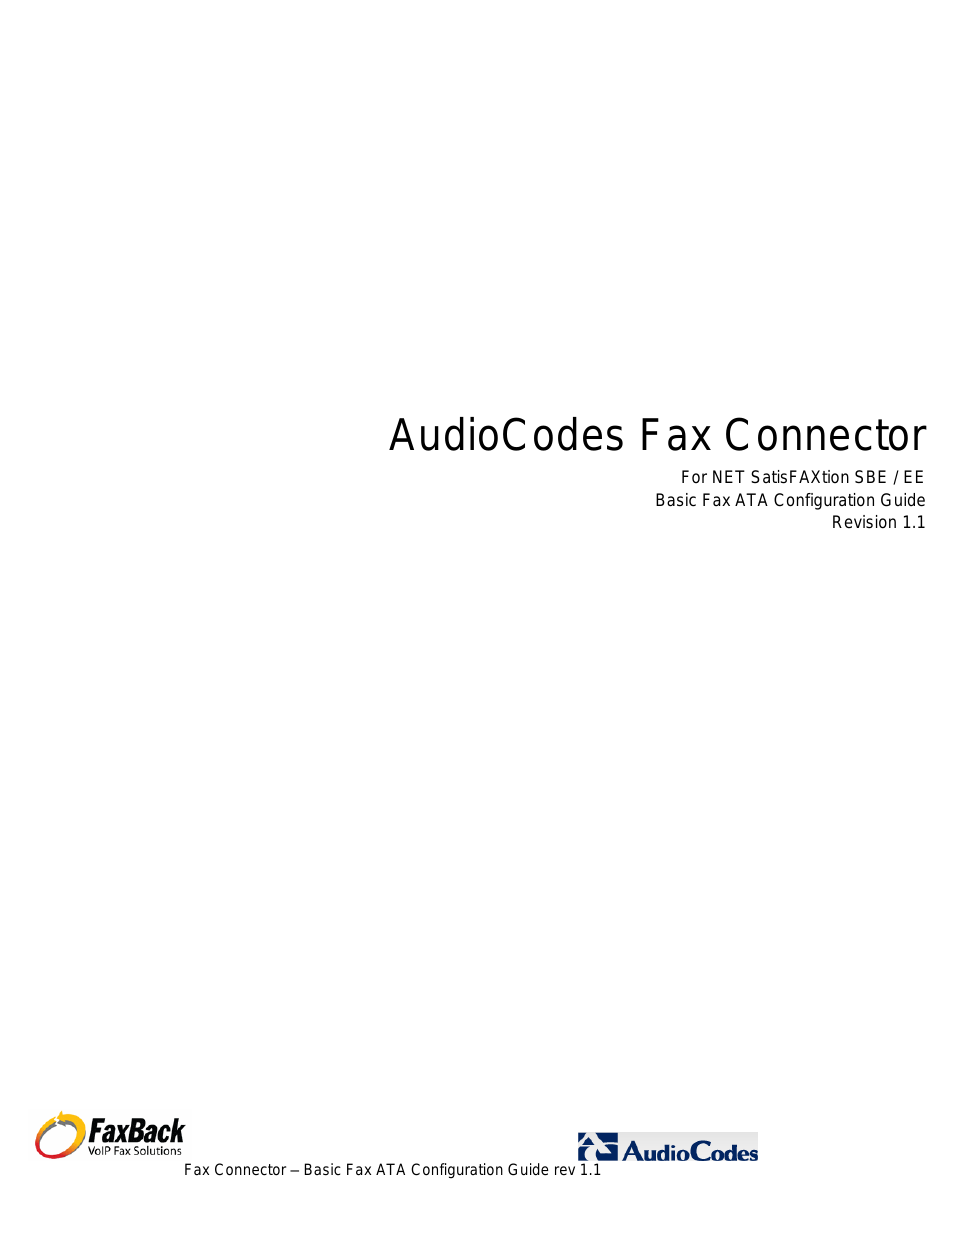 AudioCodes Fax Connector for NET SatisFAXtion SBE / EE - Basic Fax ATA Configuration Guide